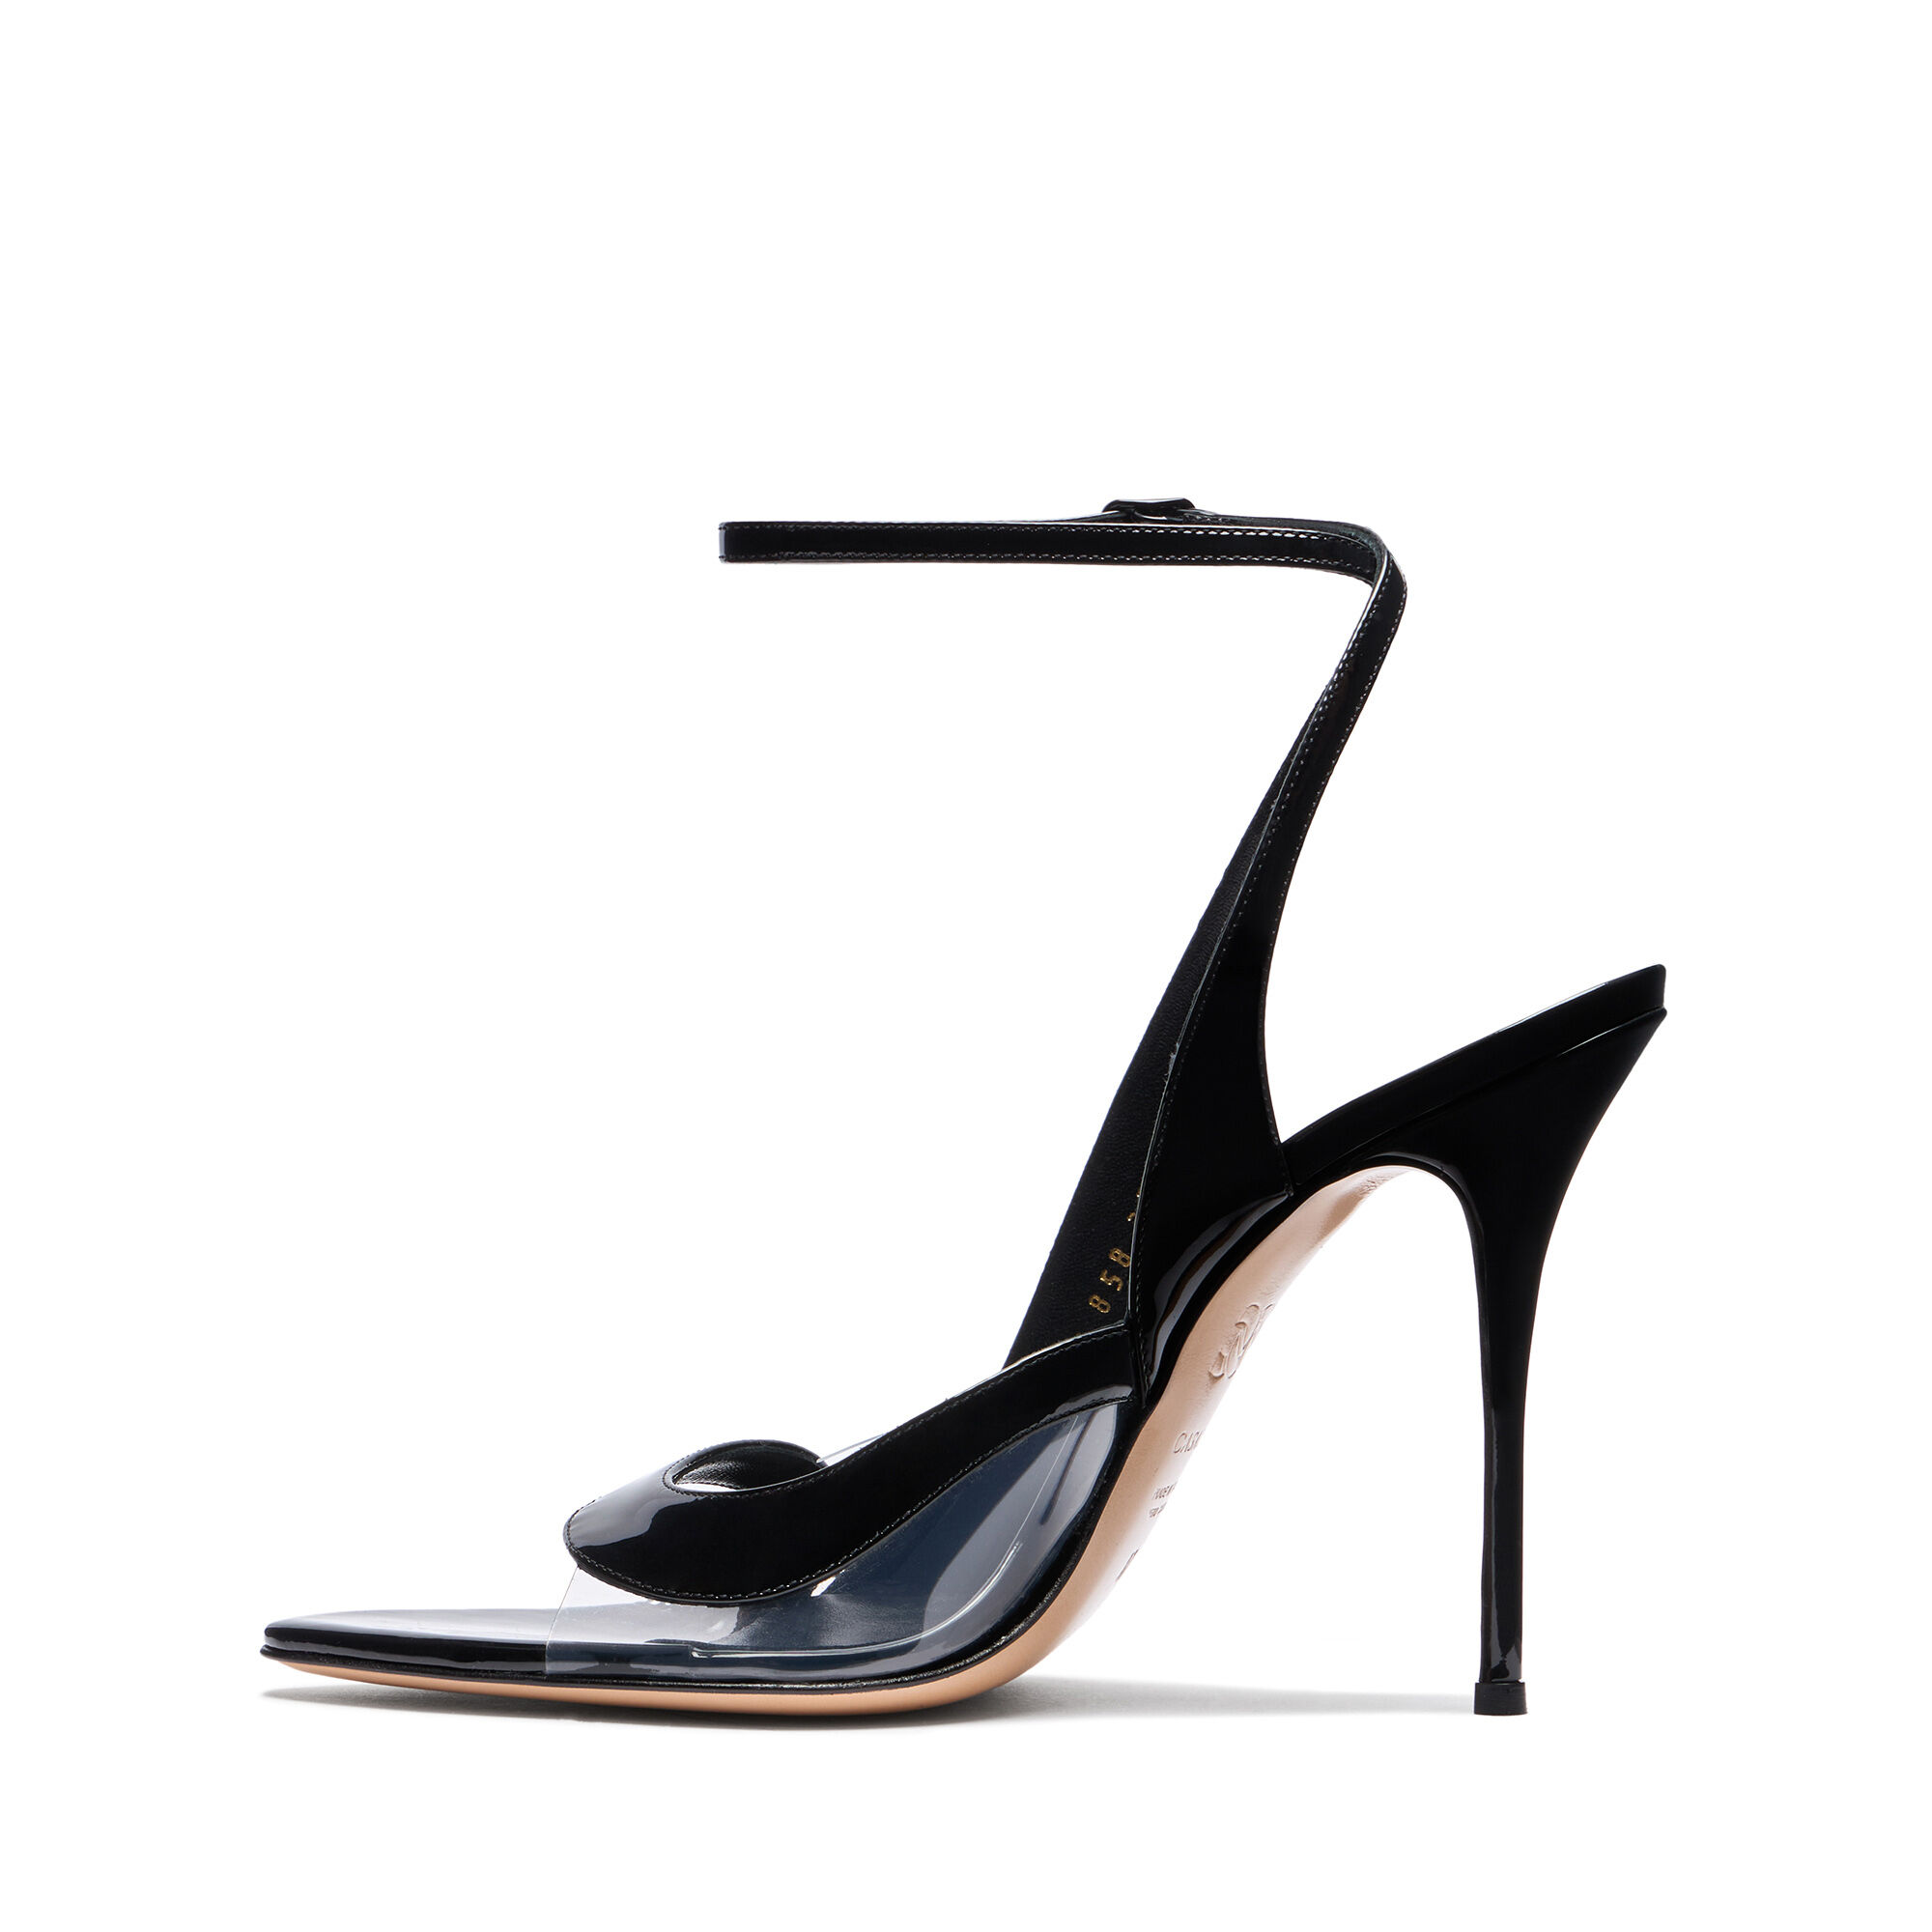 Scarlet Slingback Patent Leather Sandals in Black for Women | Casadei®